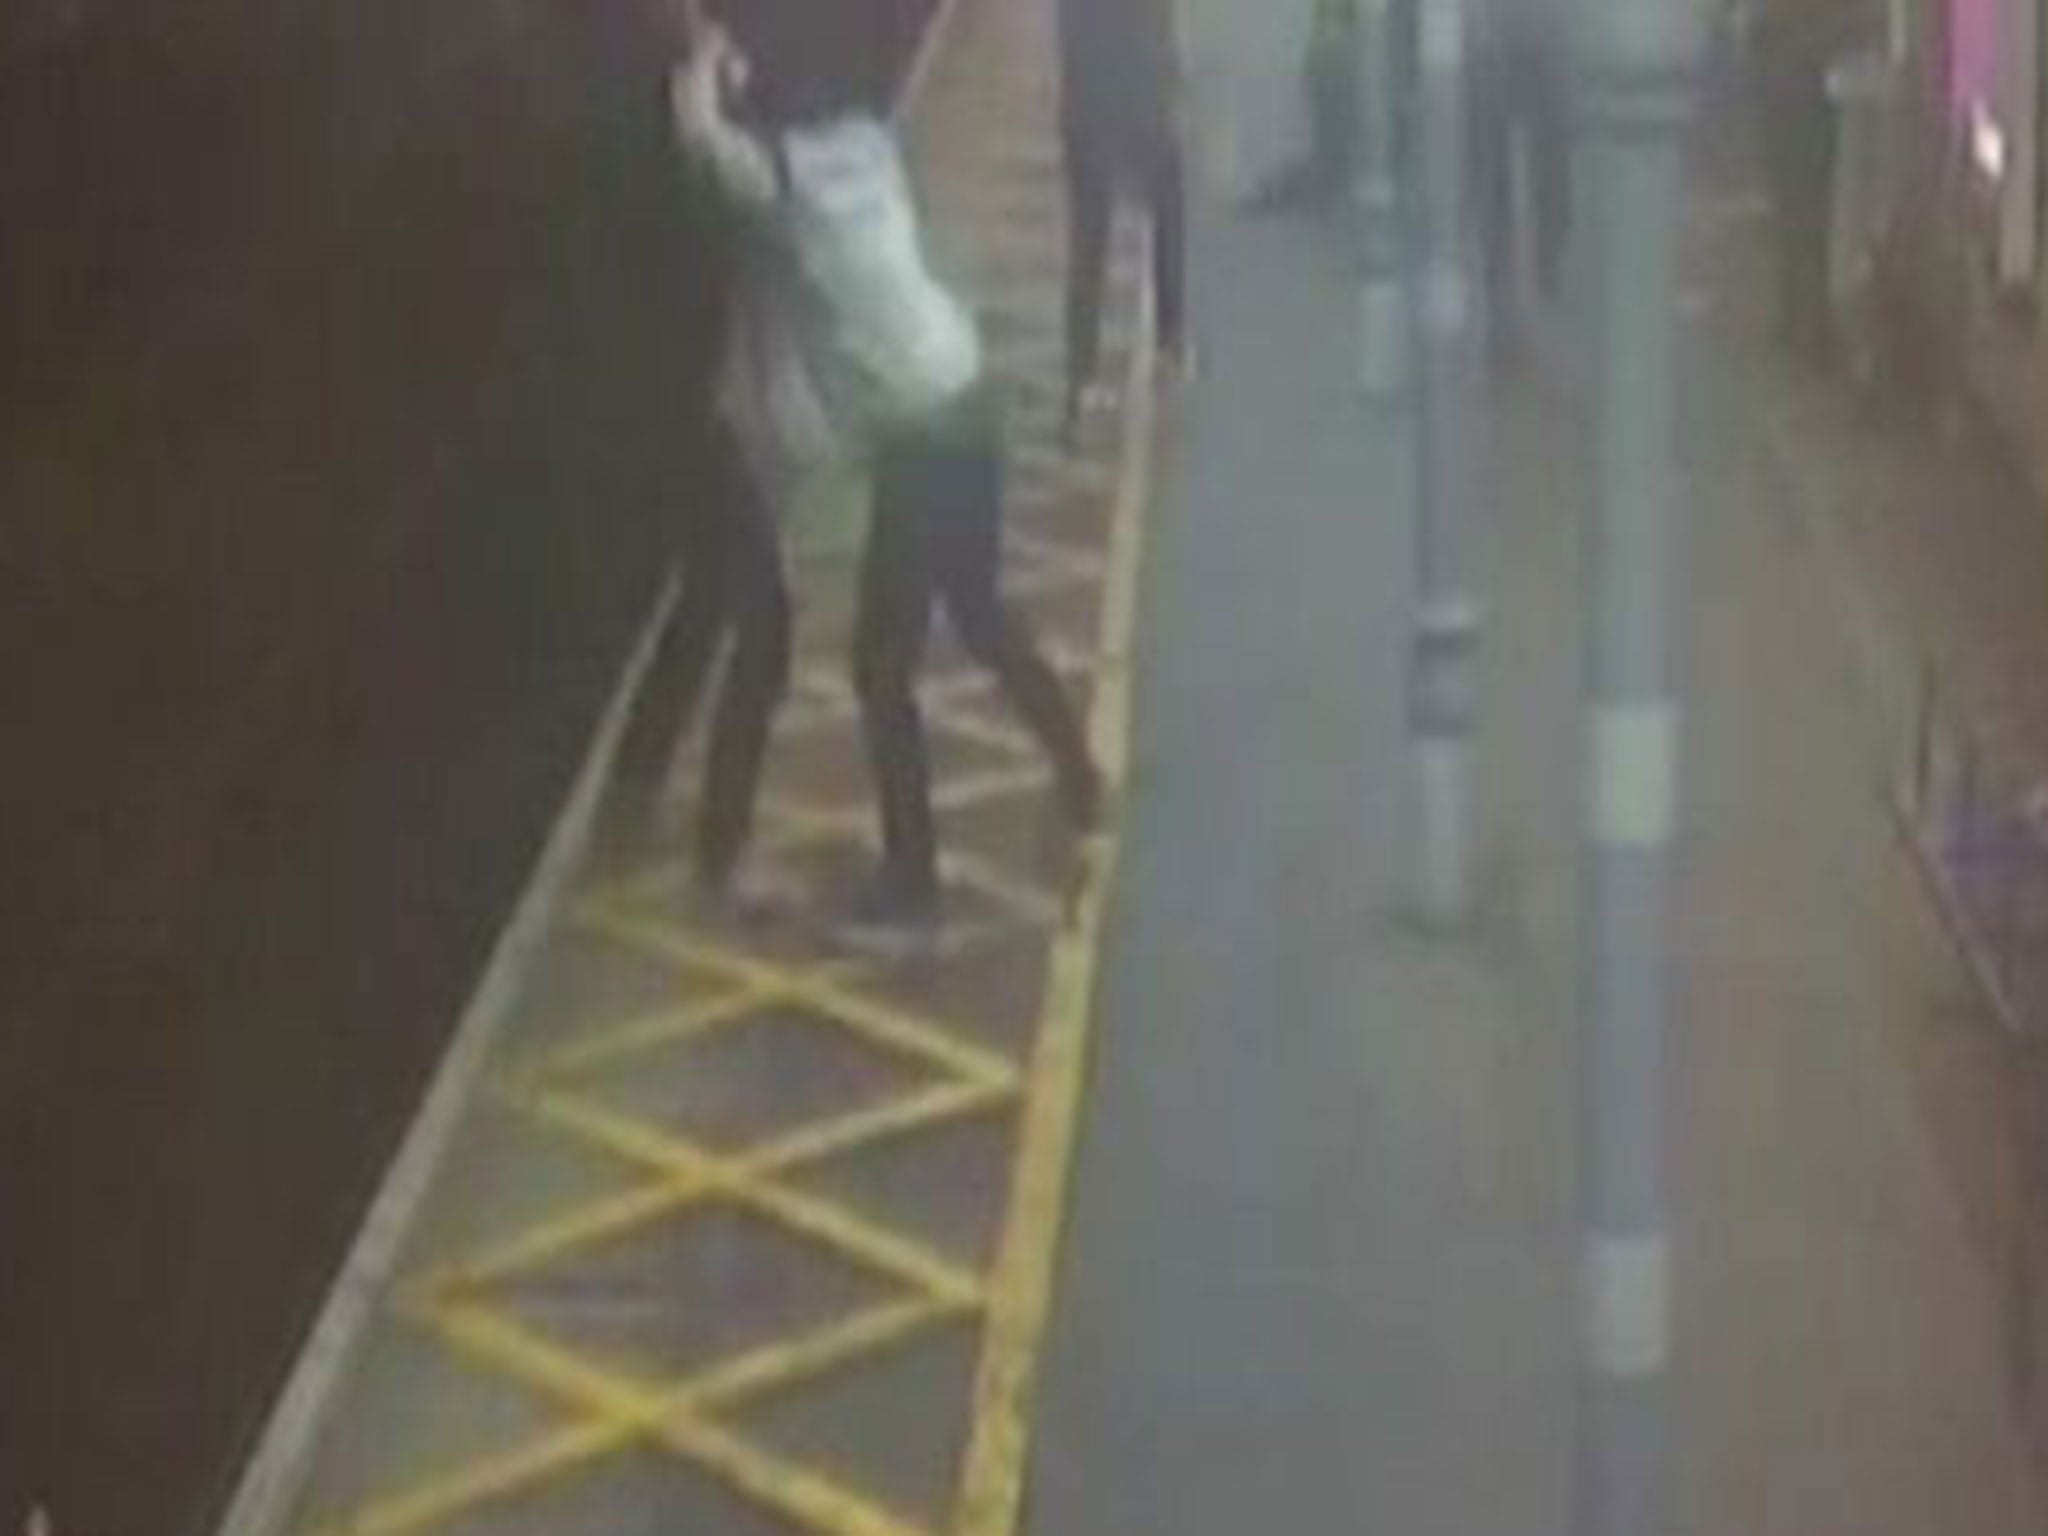 A still taken from CCTV footage of a registered blind man being pushed onto the tracks during a violent assault at a train station.